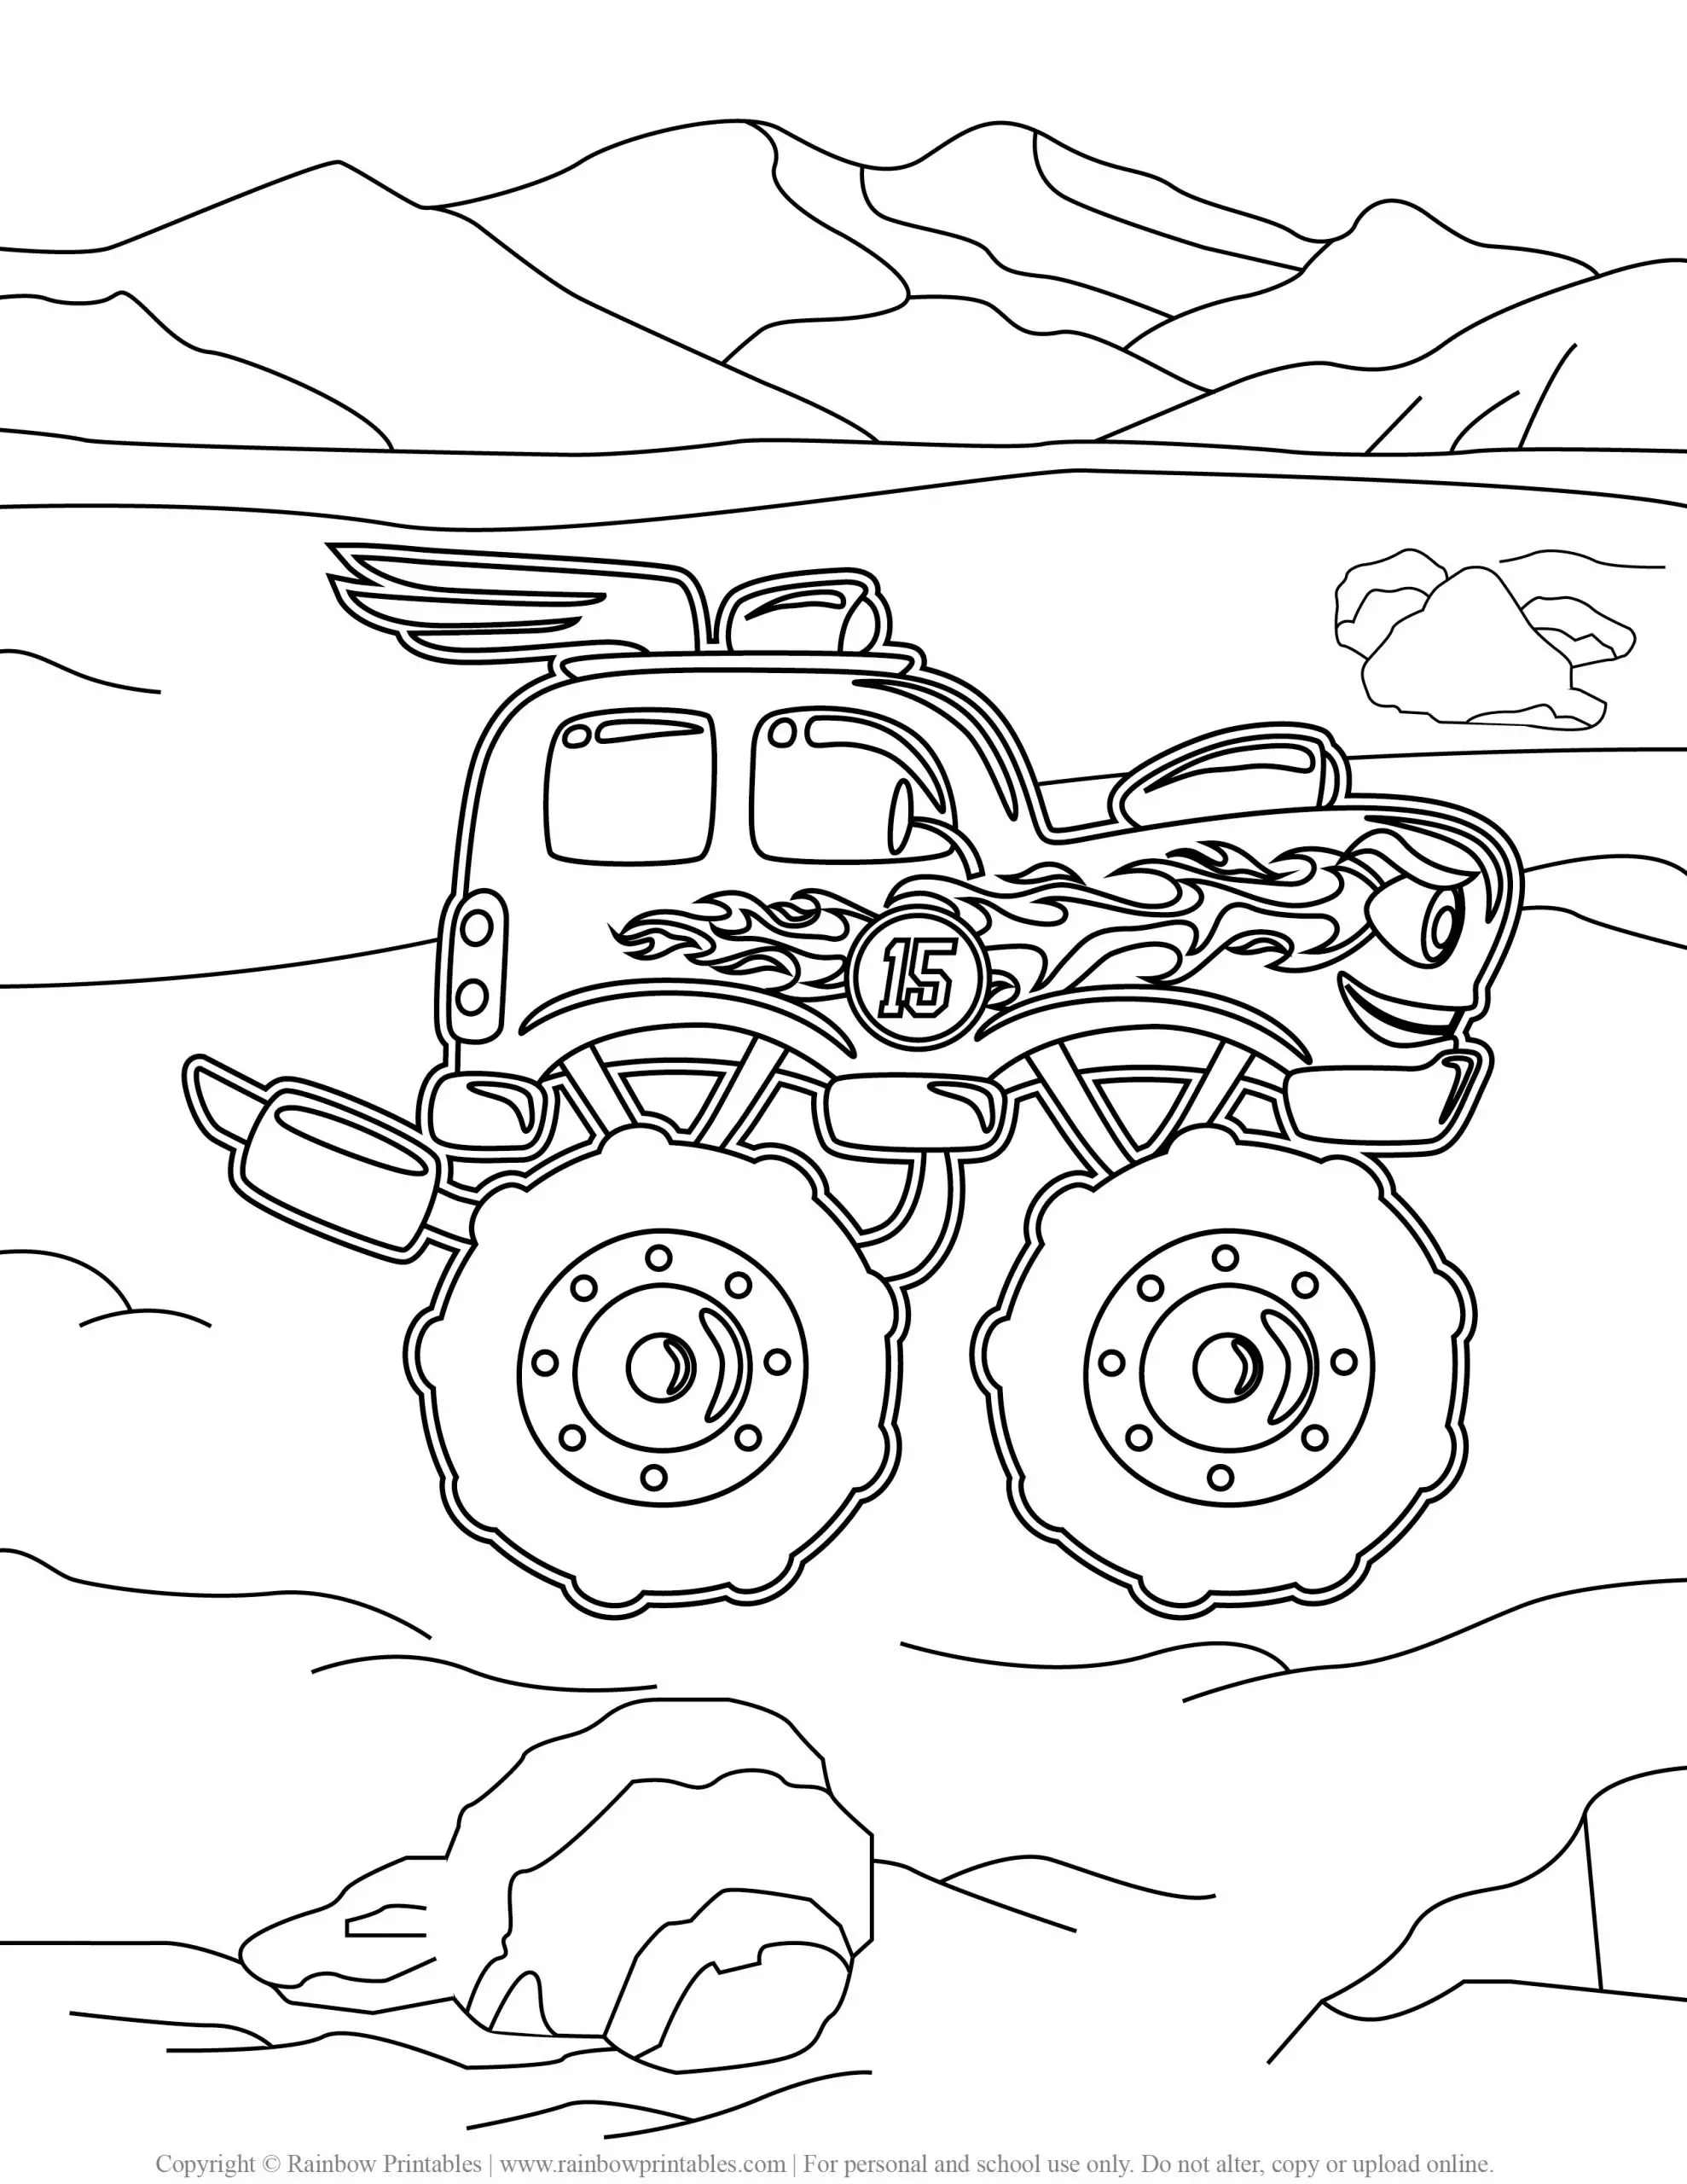 Monster Truck coloring pages, hot wheels, grave digger, jam, games drawing, monster truck party madness, coloring pages for boys,USA America illustration Freebie